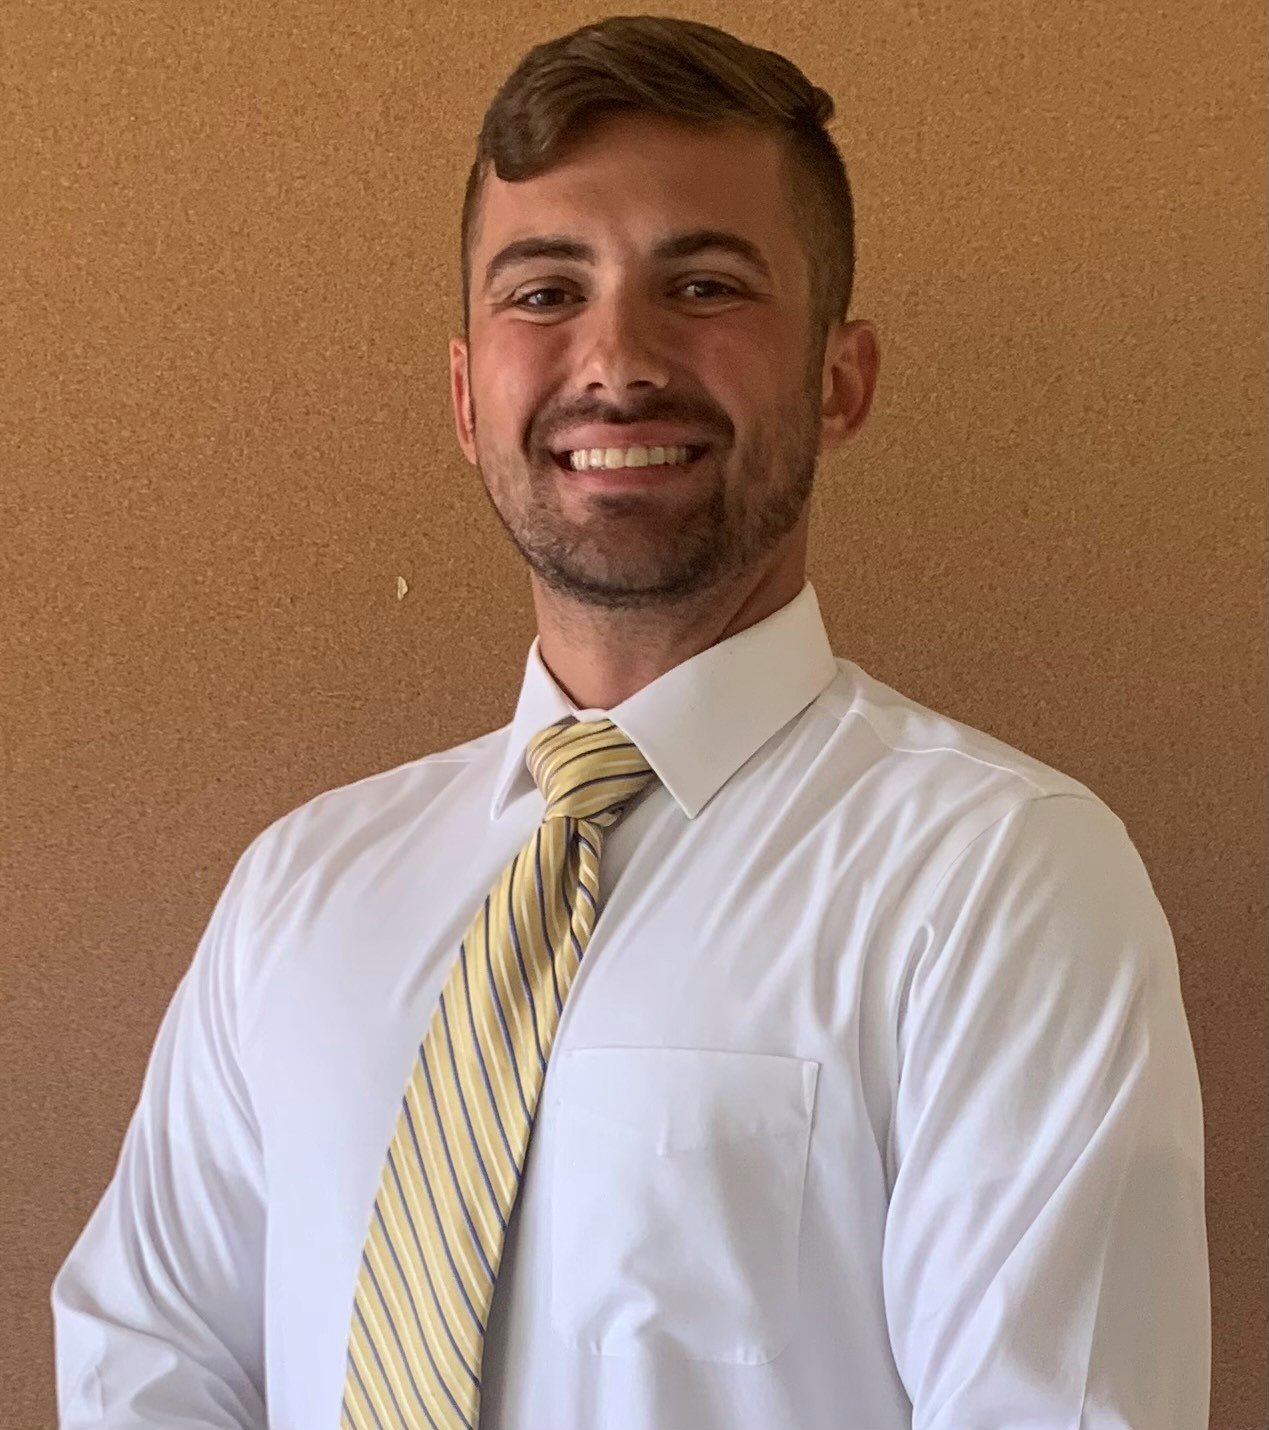 Ryan Heyel will be one of two Wright City cross country coaches this season. Heyel will also serve as the assistant band director for the district.